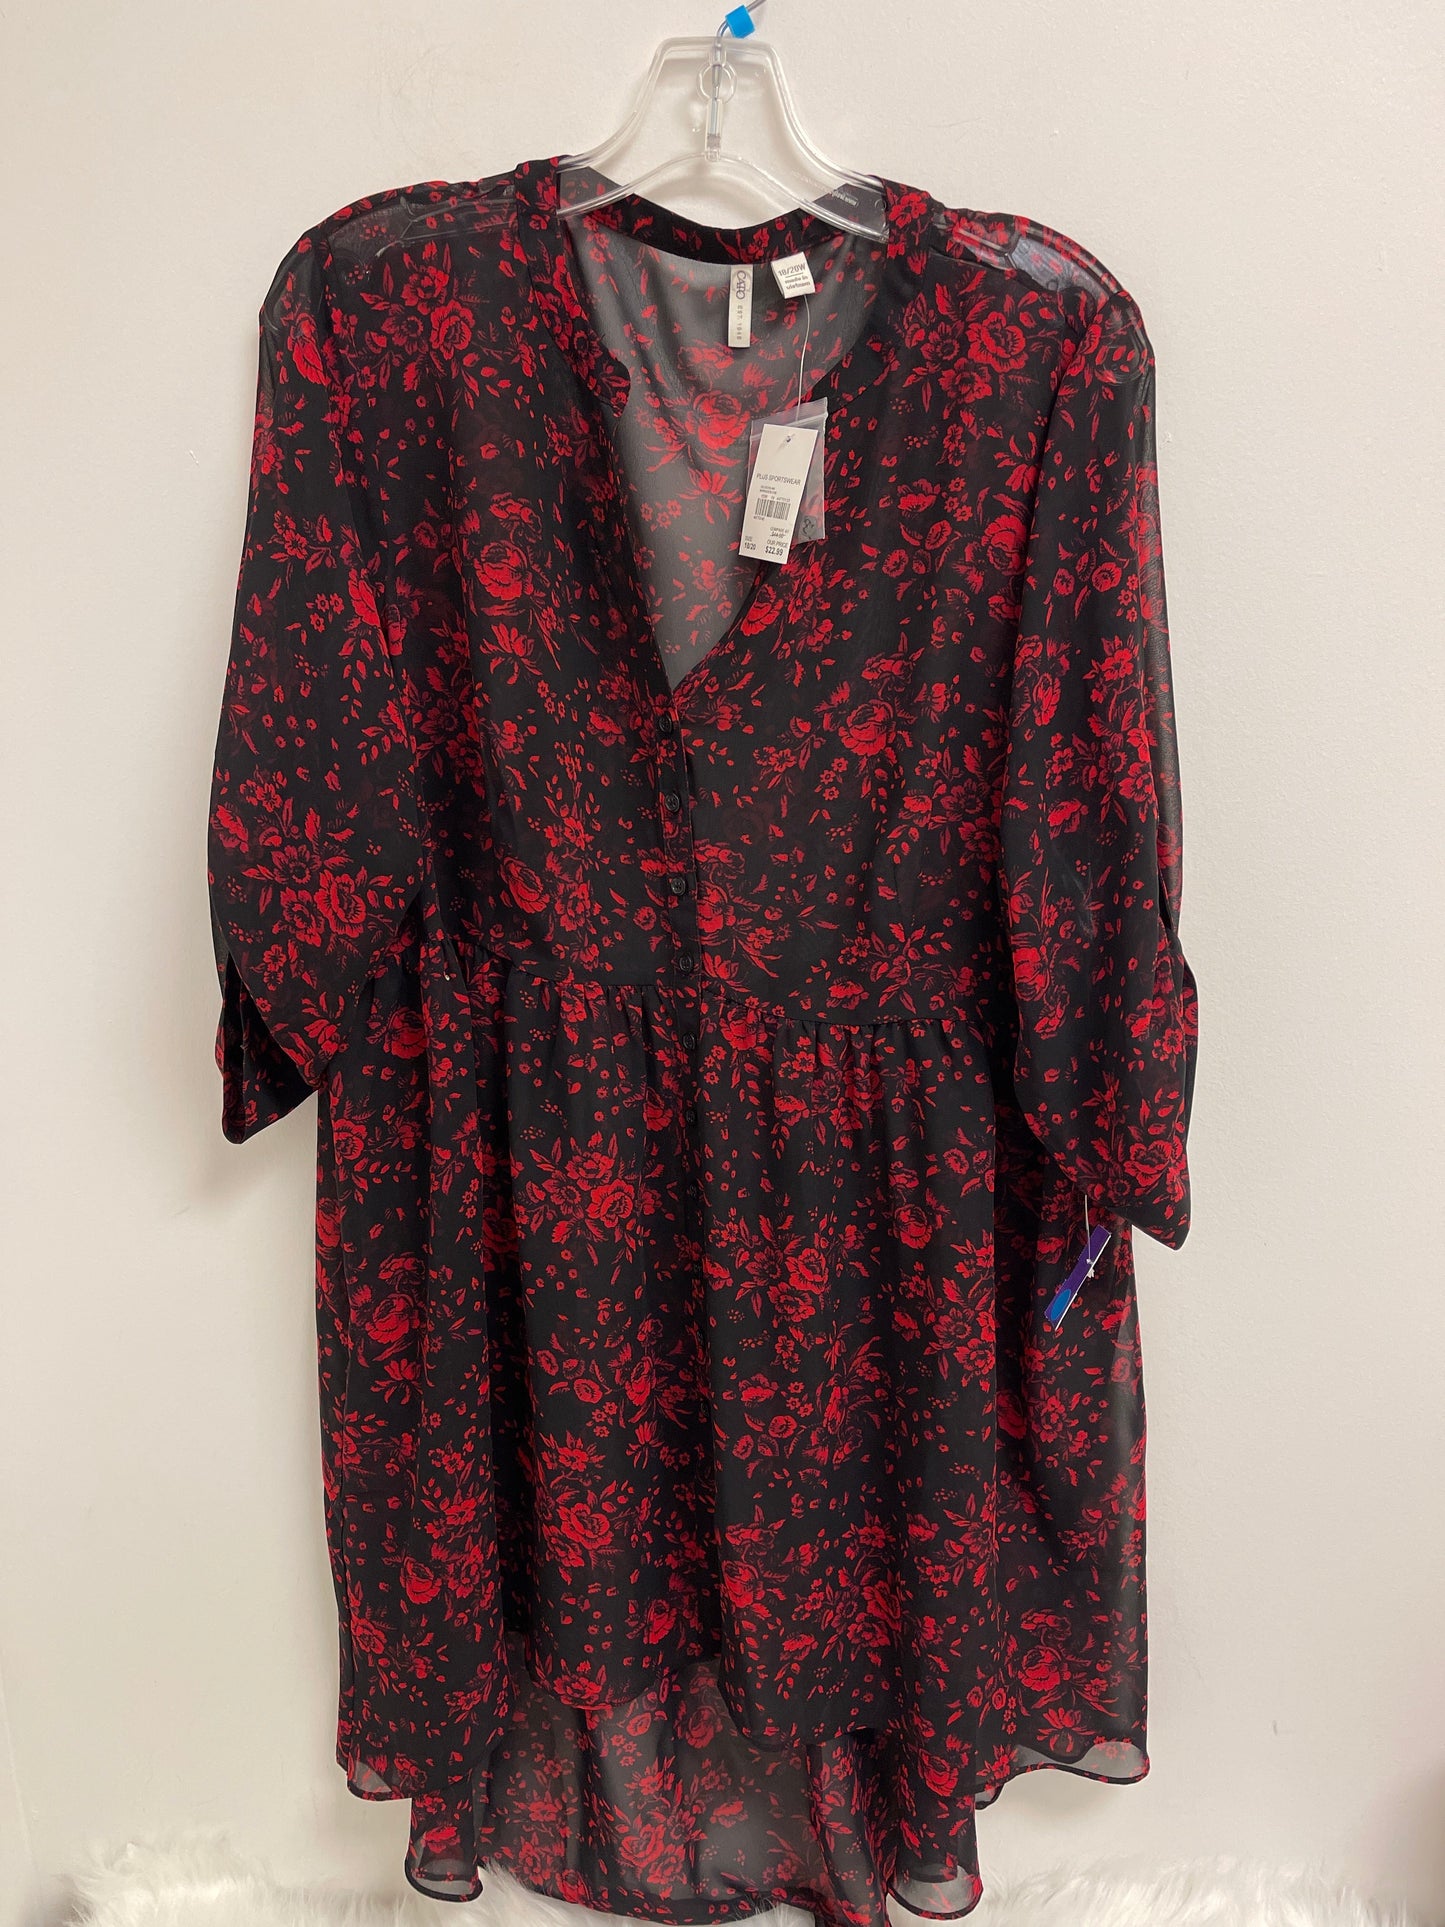 Black & Red Tunic Long Sleeve Cato, Size 2x